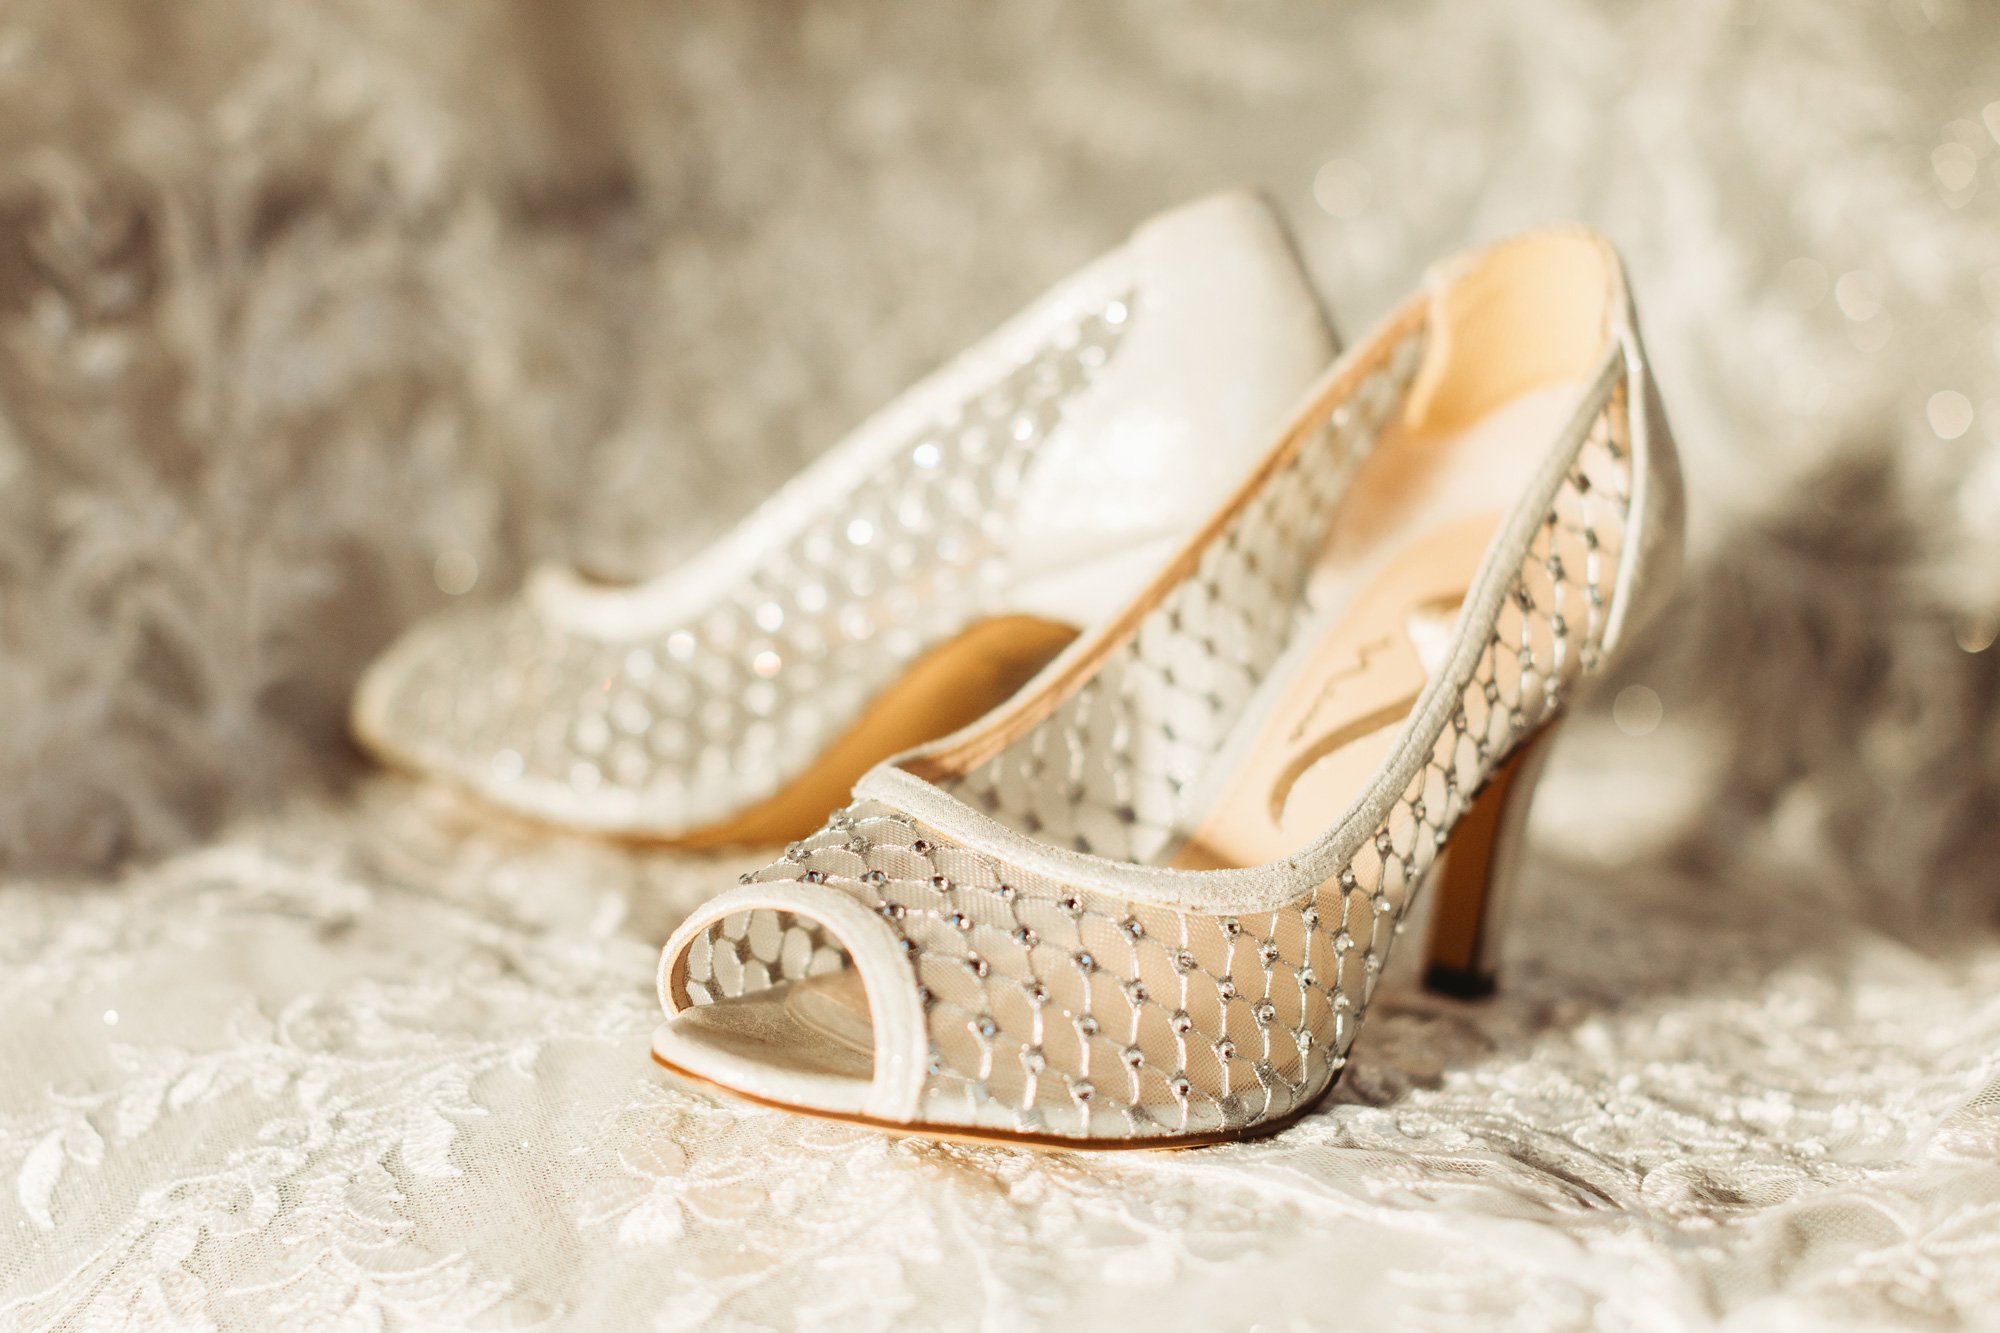  Teala Ward Photography captures details of the bridal shoes with rhinestones and peeps toes. bridal shoes elegant #TealaWardPhotography #TealaWardWeddings #WeddingLocationsIllinois #IllinoisWedding #weddingdetails #weddingphotography #married 